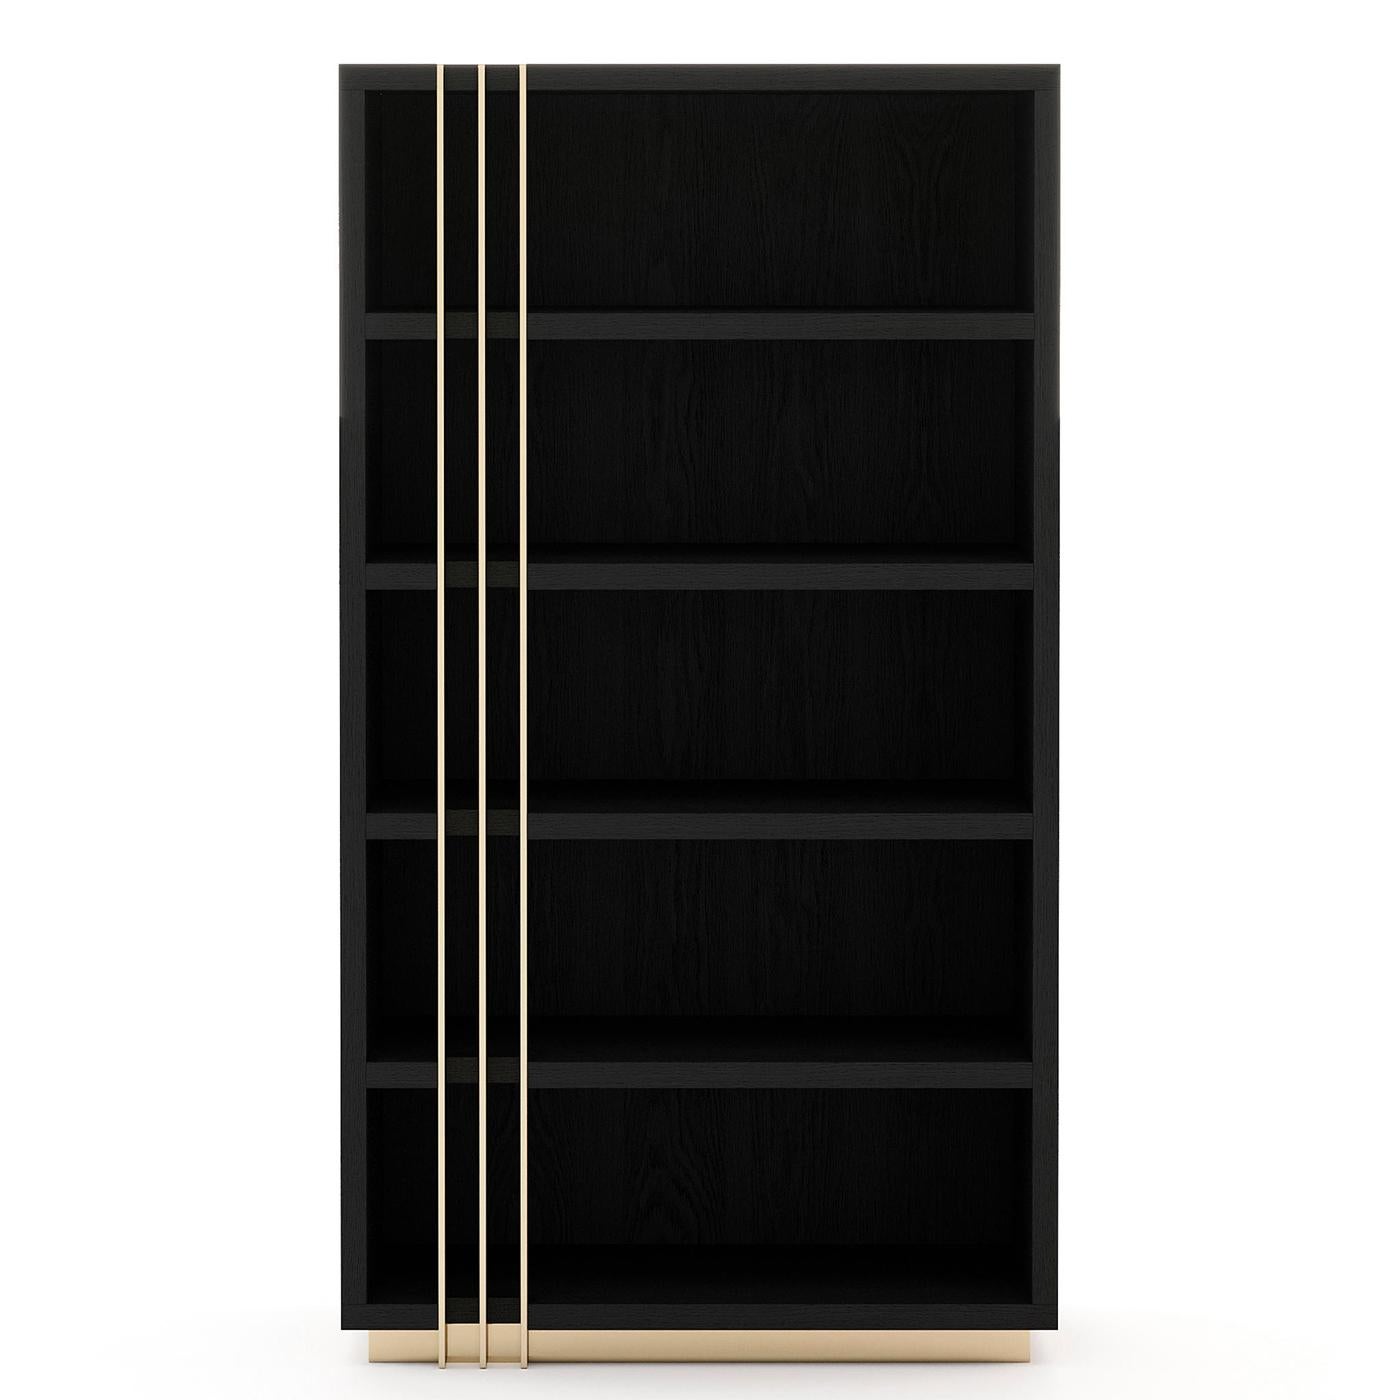 Bookcase Clark Black Ash with structure in ash venner
in black matte finish, with 3 vertical polished stainless steel 
trims in gold finish.
Also available in ebony matte finish, or grey oak matte finish,
Or natural oak finish, or rosewood matte